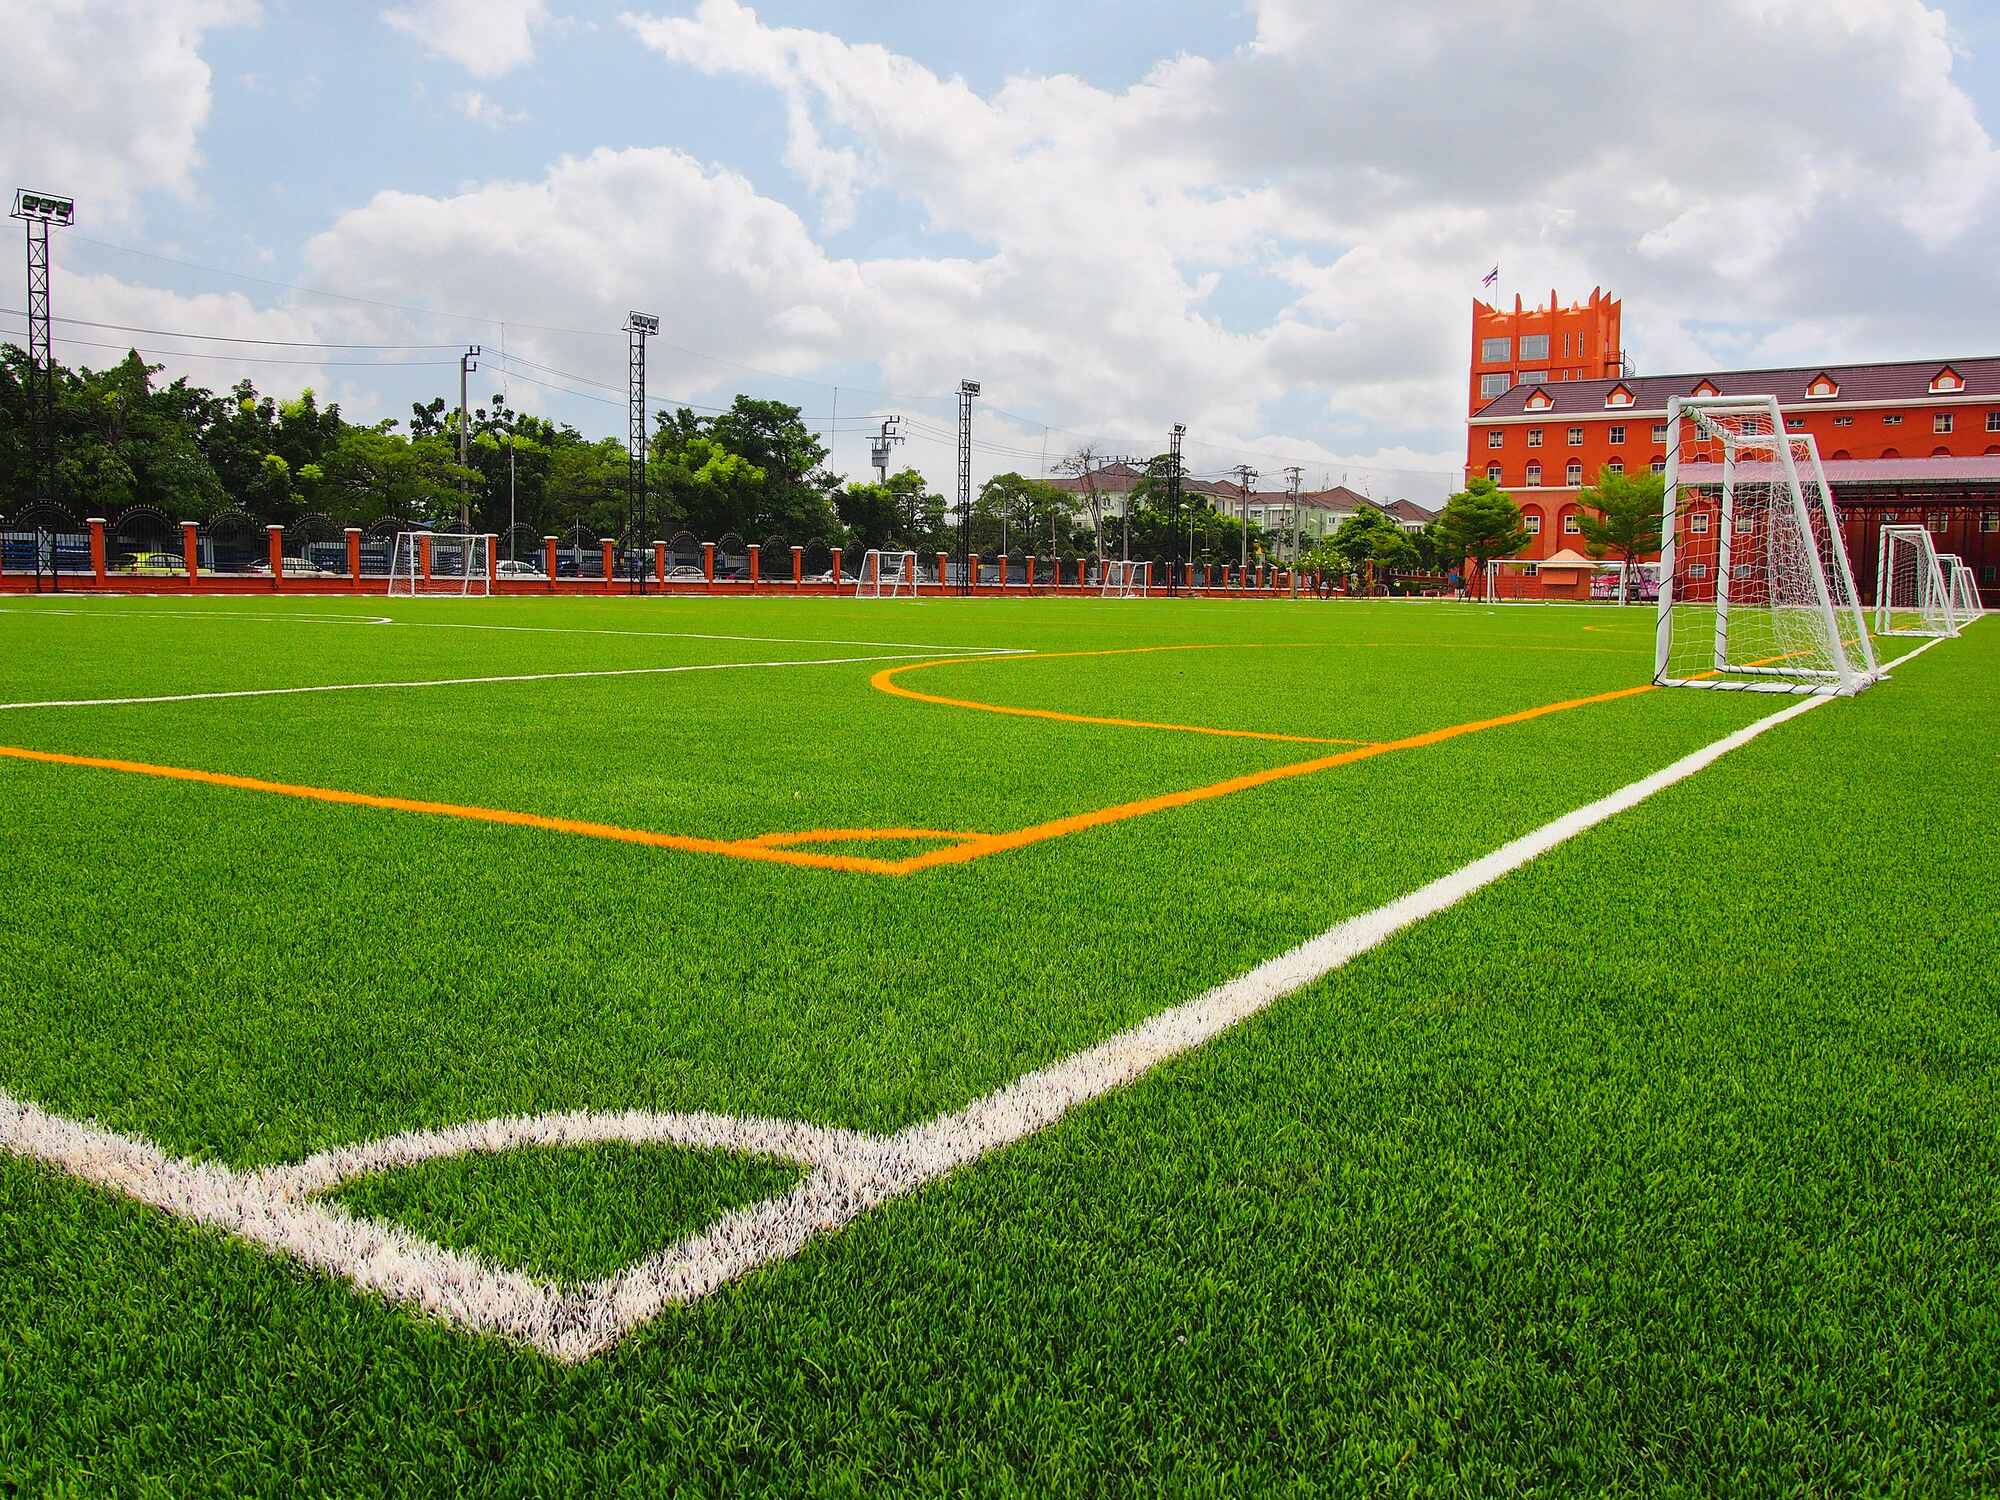 Photograph of a turf soccer field outside of a high school.